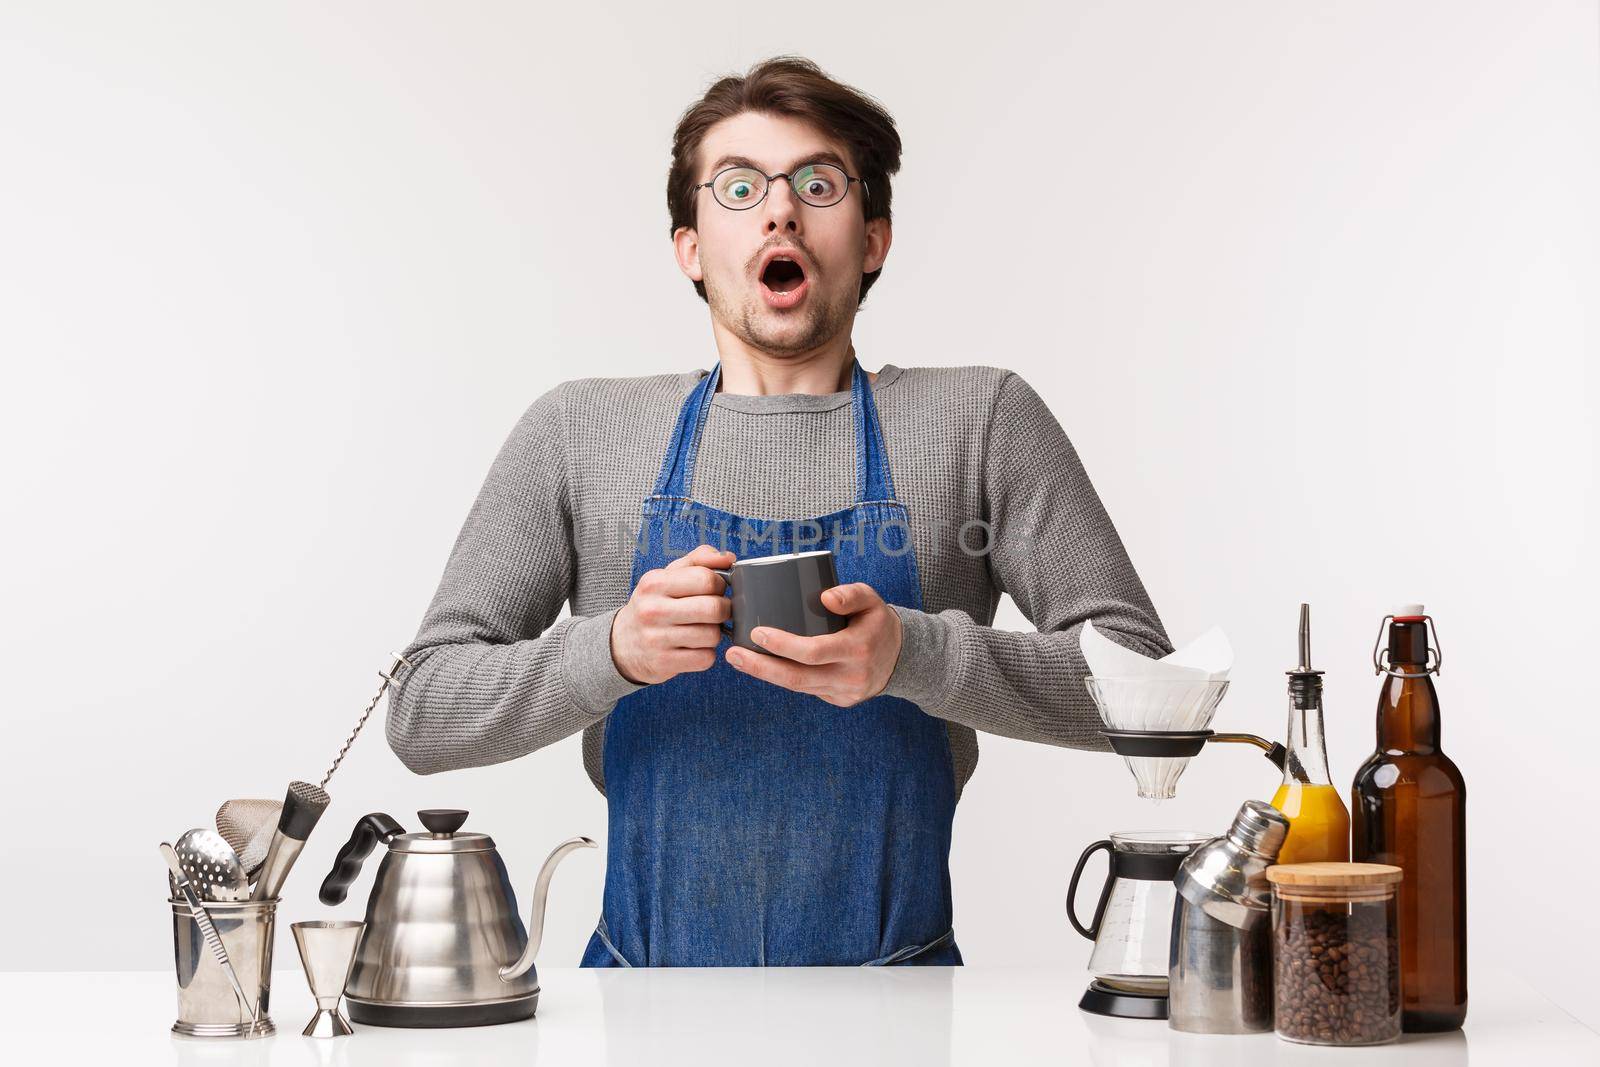 Barista, cafe worker and bartender concept. Shocked startled young male employee in apron, gasping astonished holding tea cup and staring amazed being scared while prepare coffee, white background.